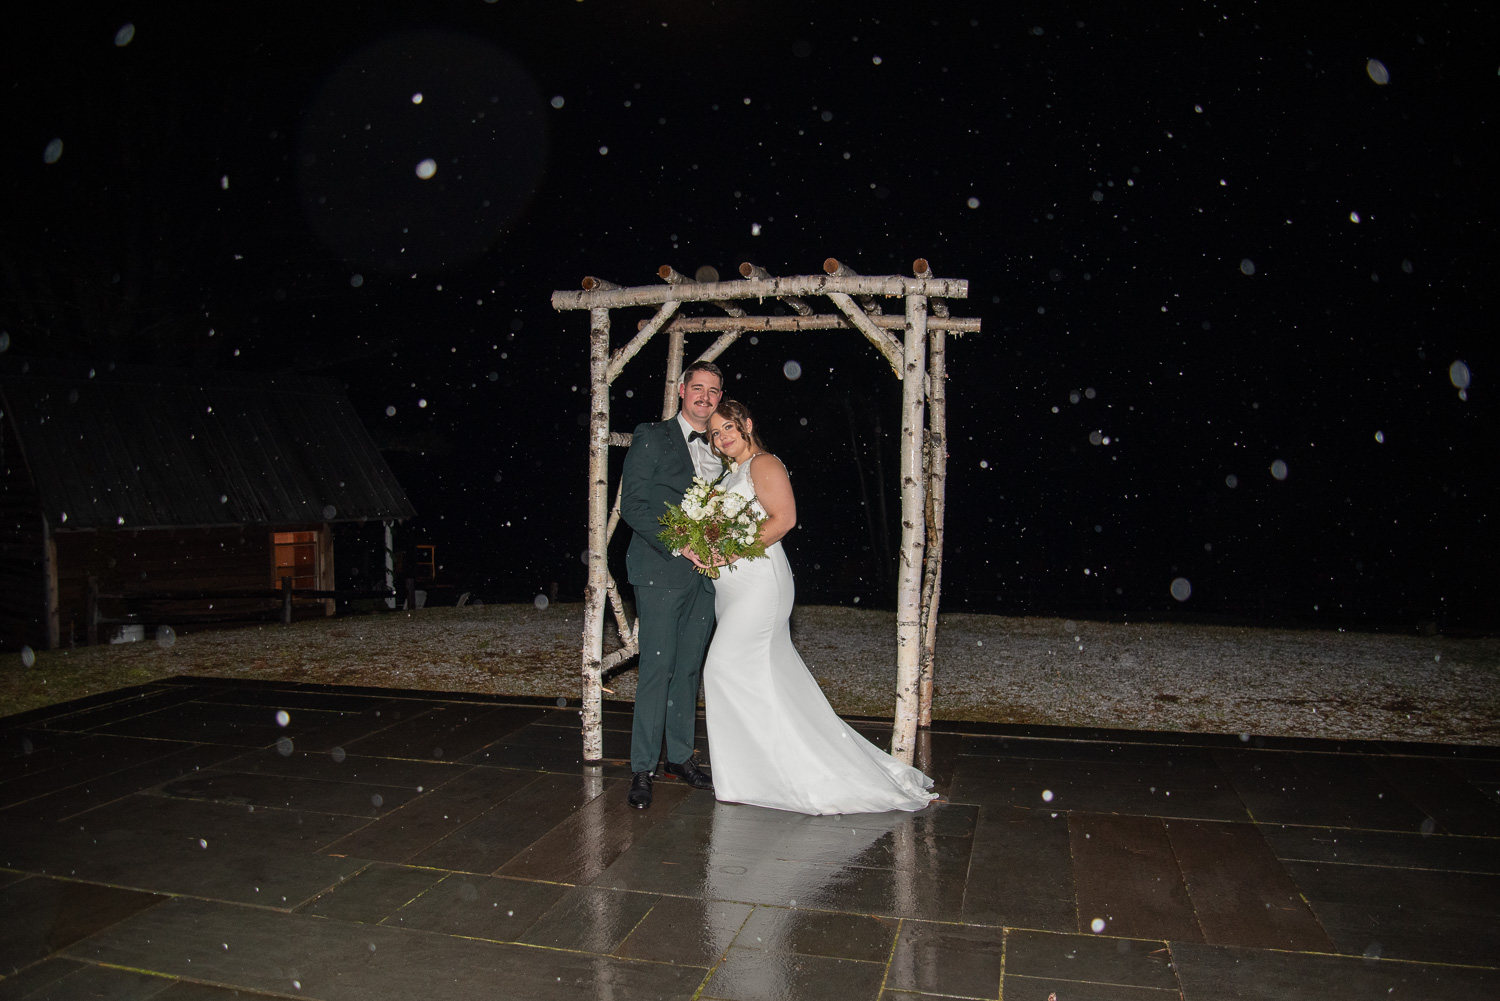 The bride and groom under the altar at the winter wonderland wedding